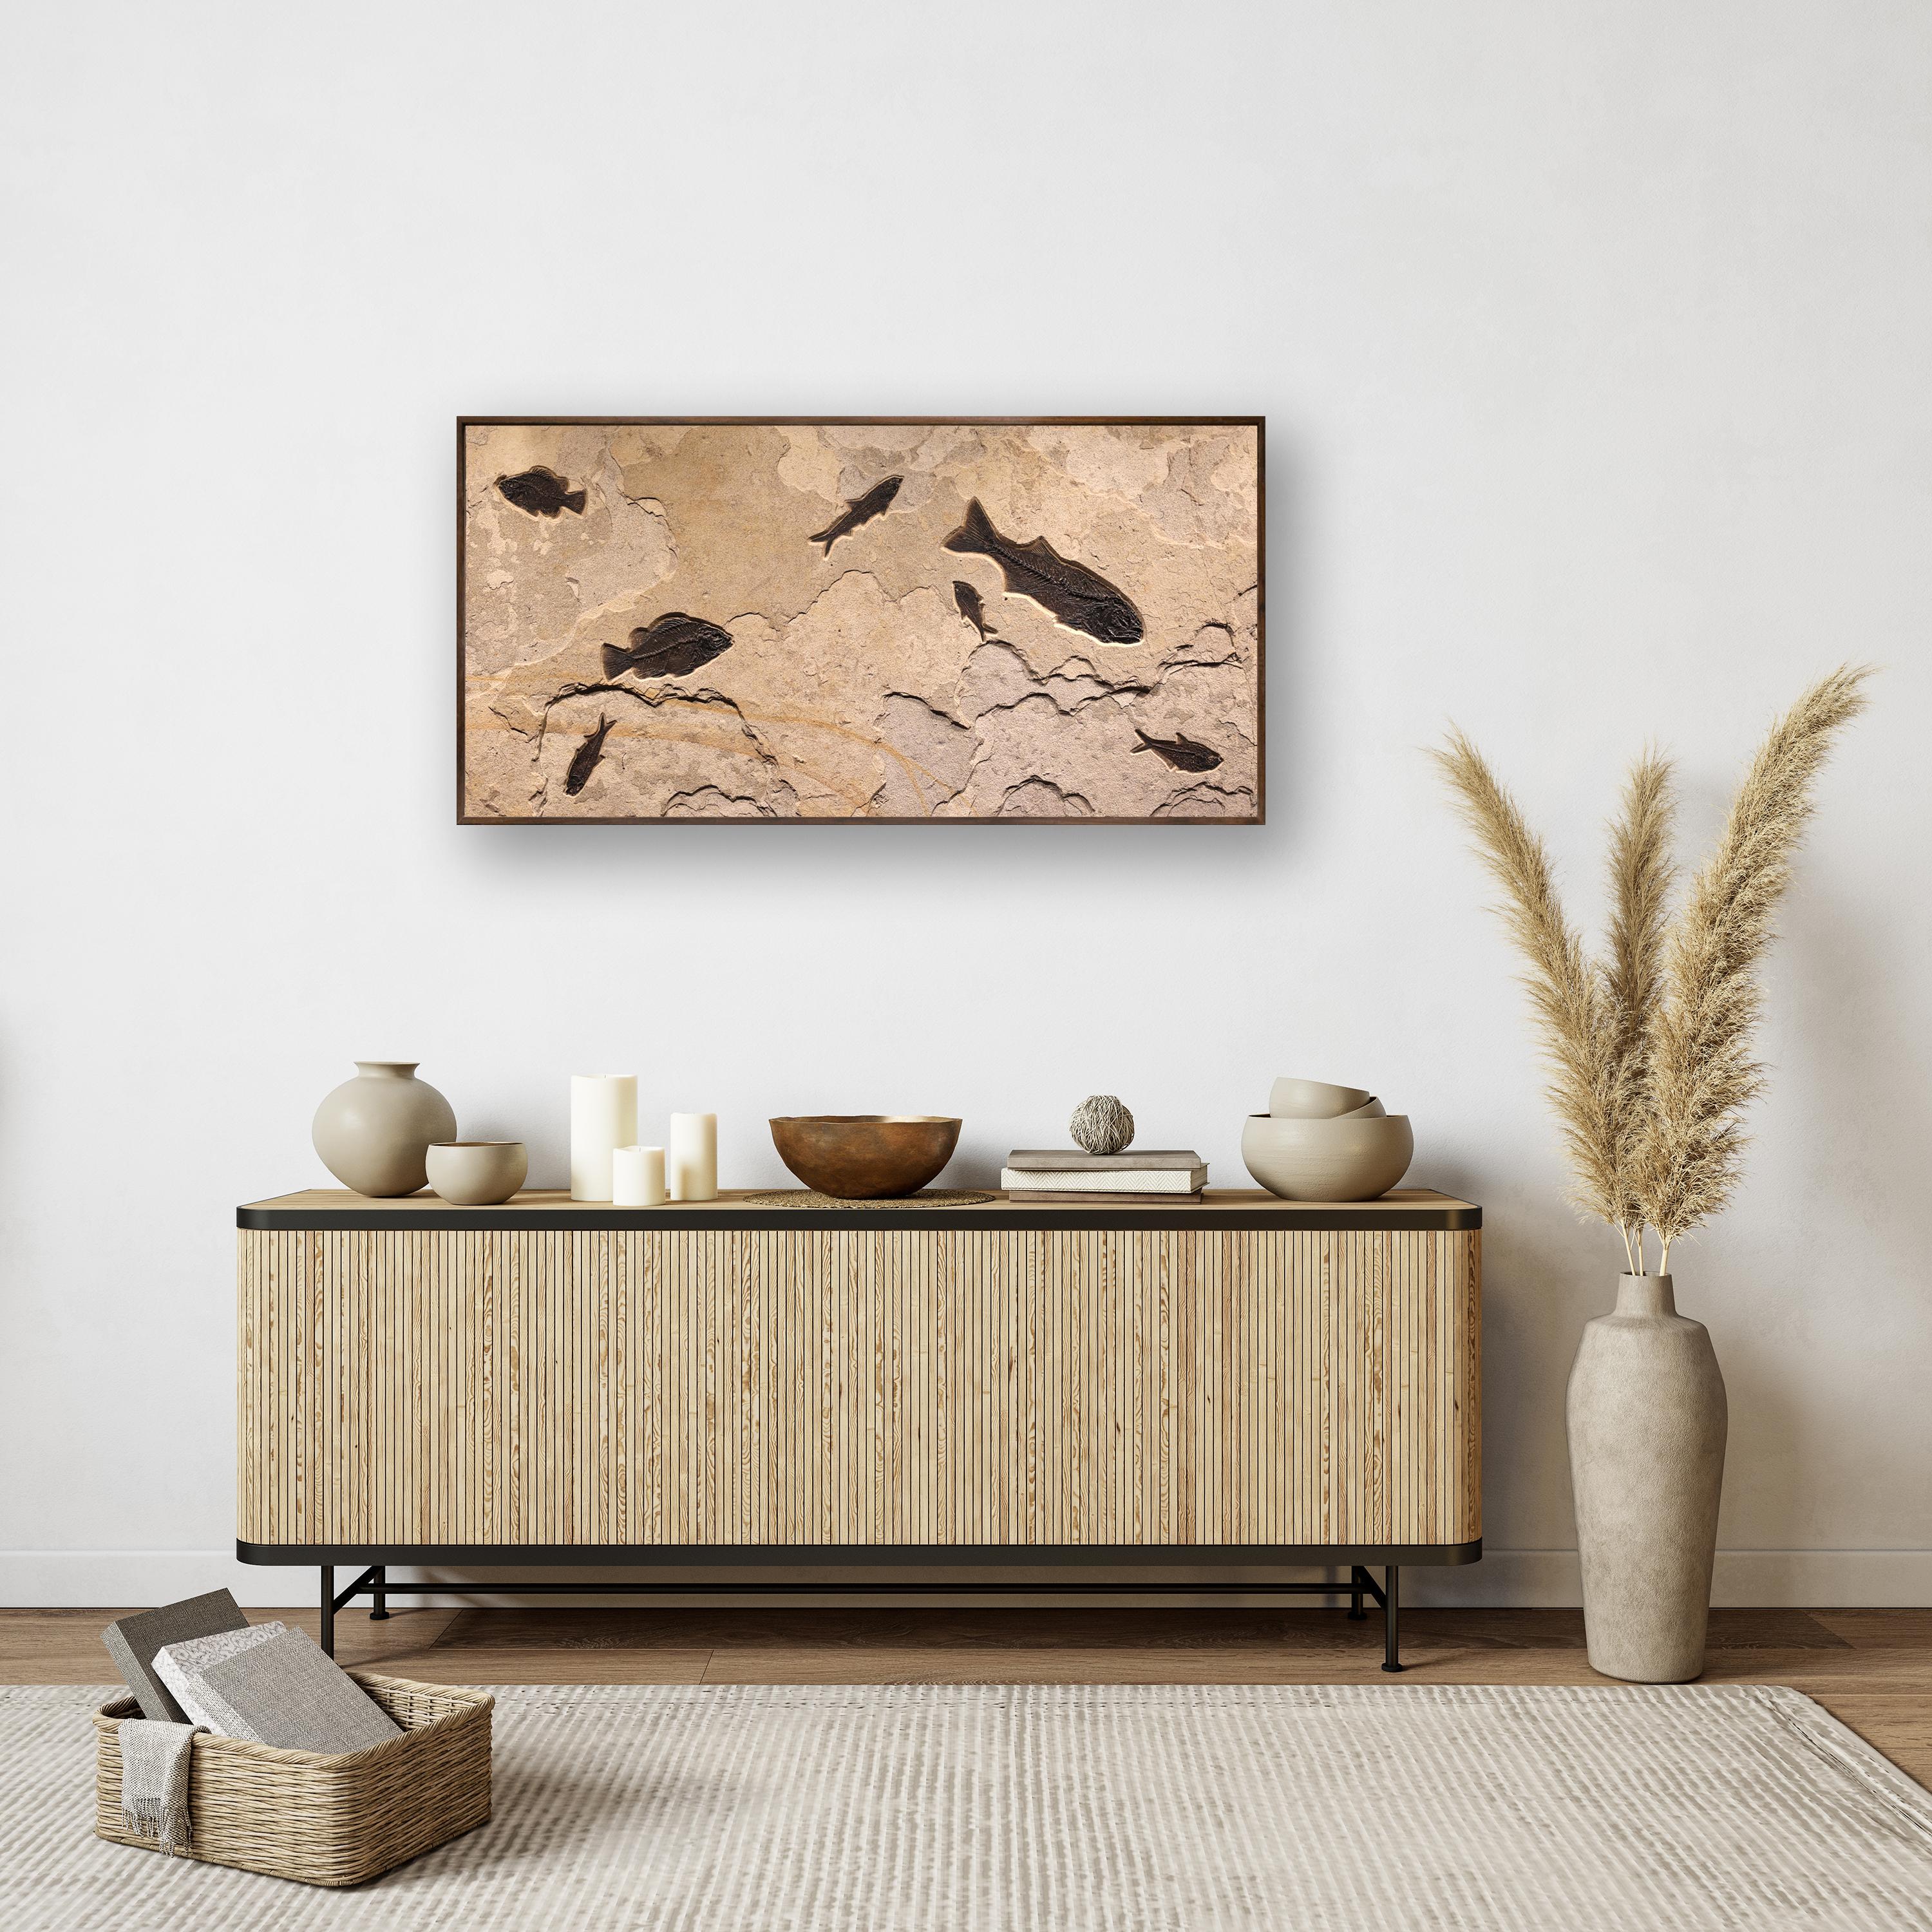 Immerse yourself in the timeless beauty of natural history with our exquisite collection of luxury fossil art. Showcasing breathtaking natural specimens from the legendary Green River Formation in Wyoming, each piece crafted by Green River Fossil